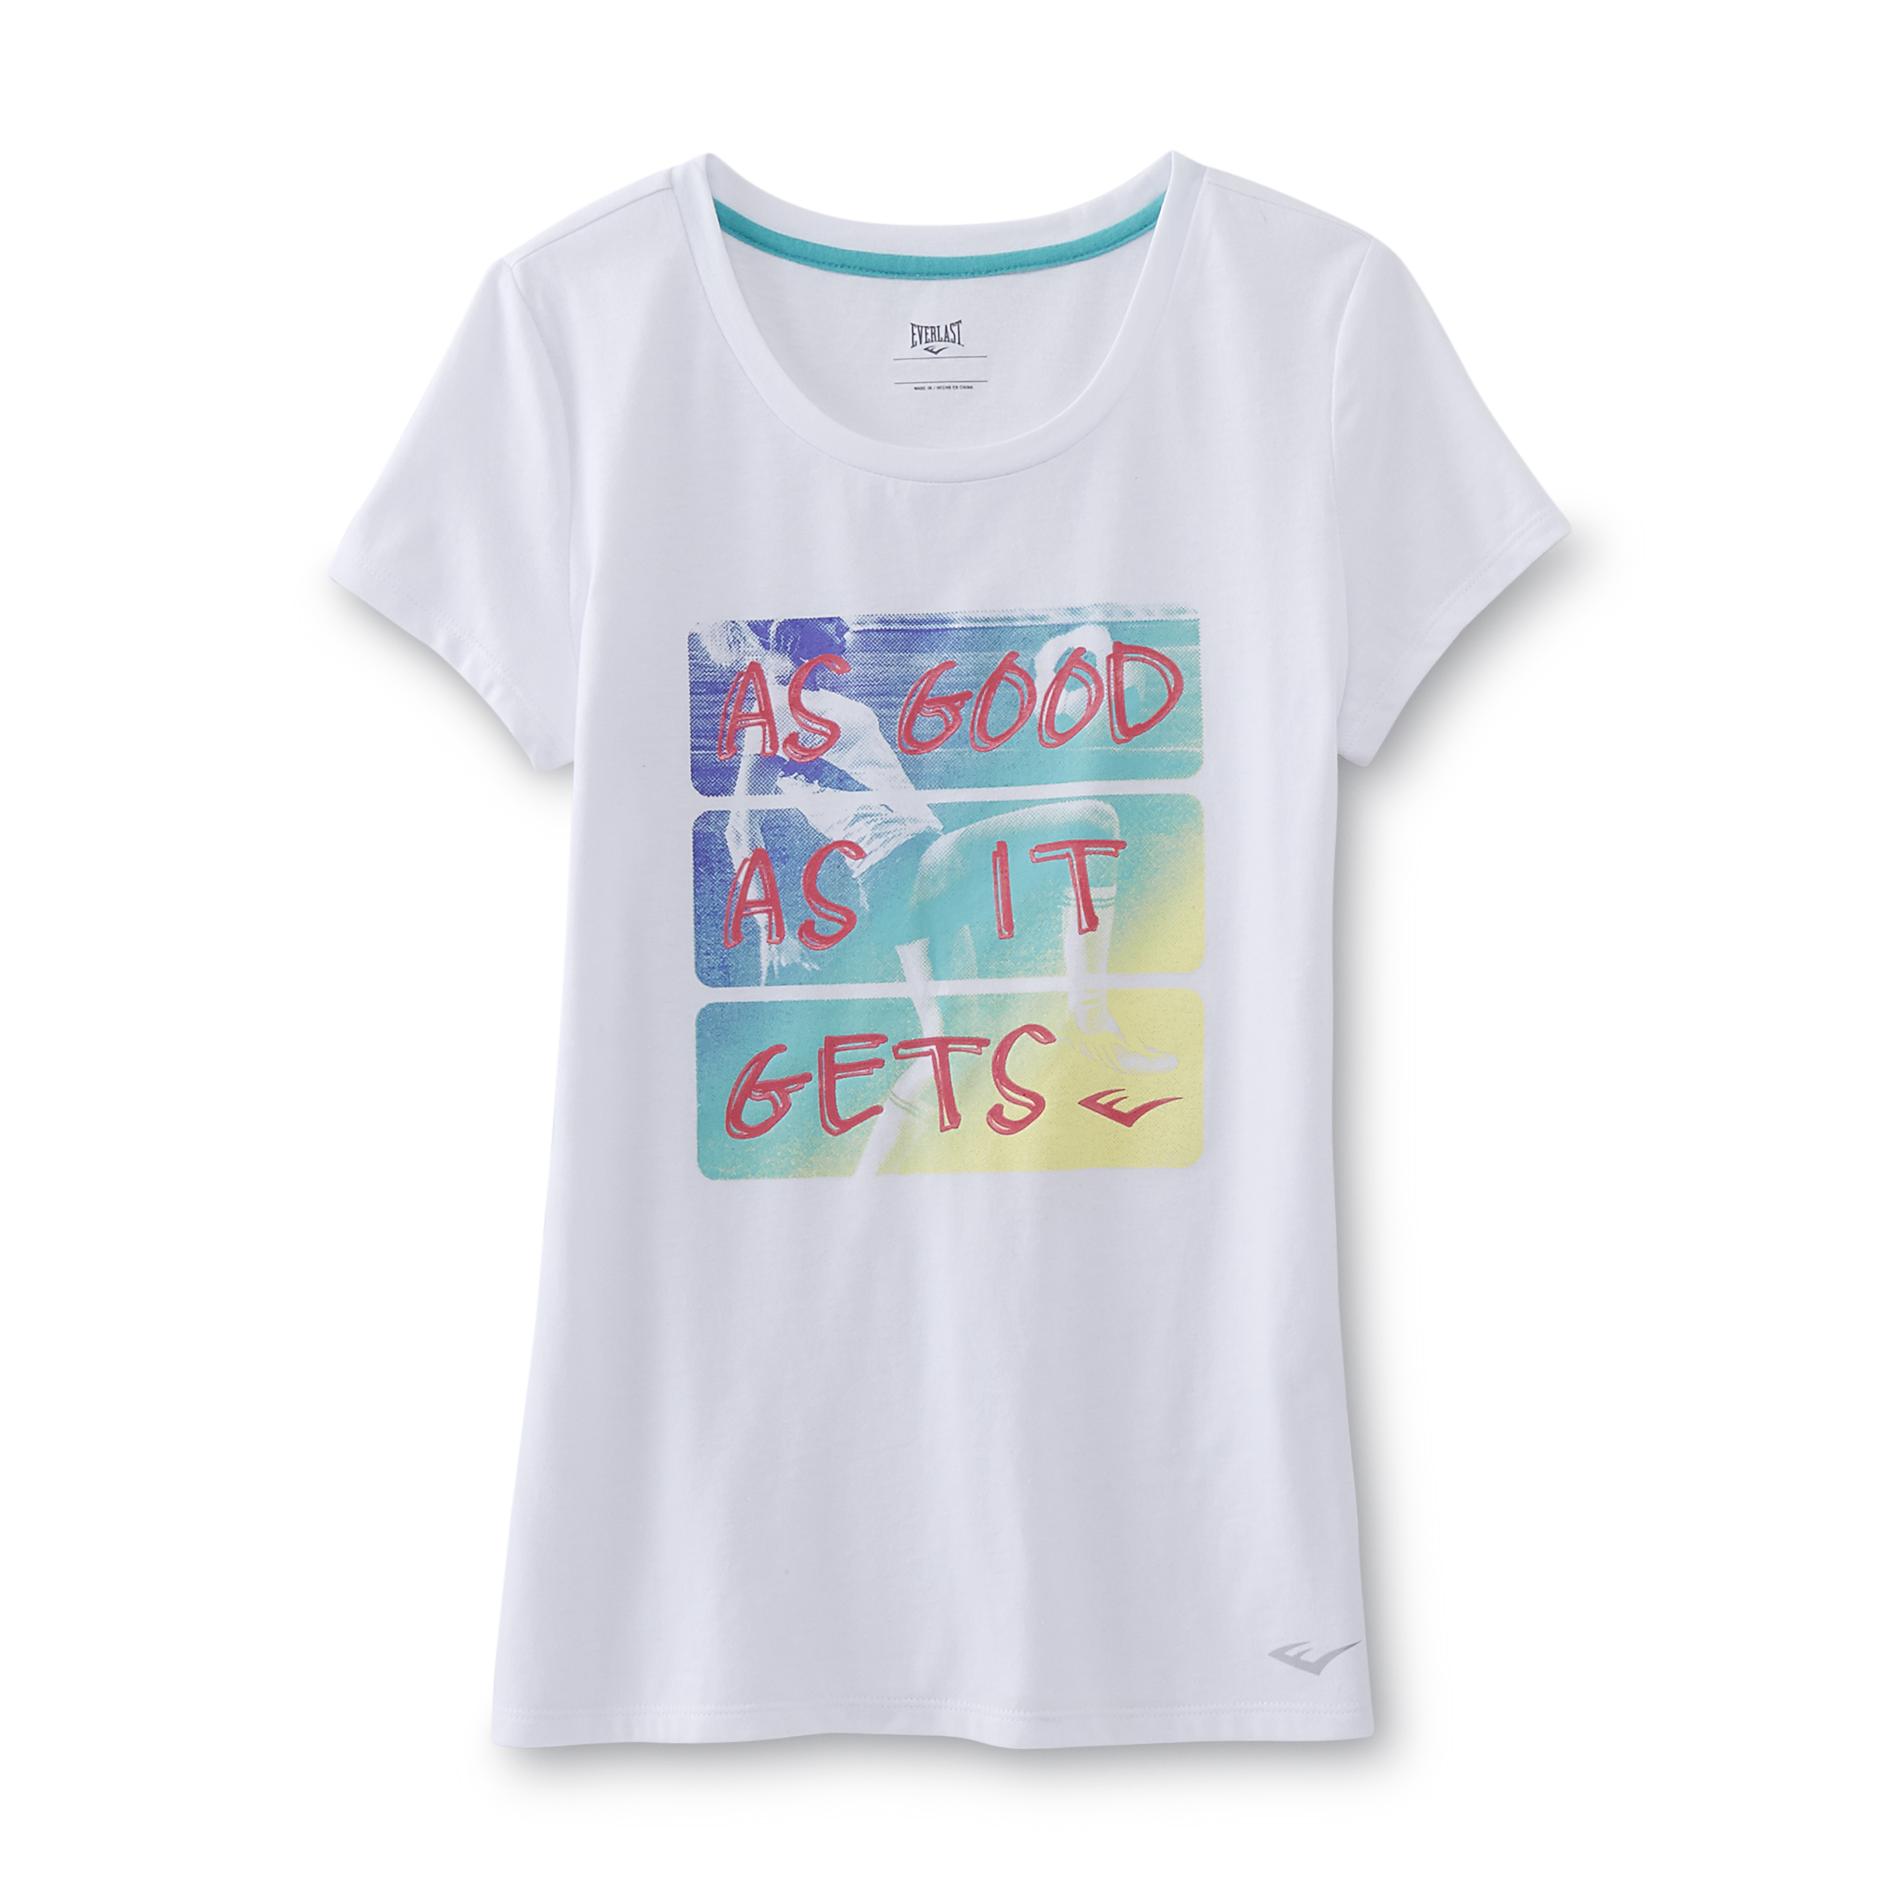 Everlast&reg; Girl's Graphic T-Shirt - As Good As It Gets